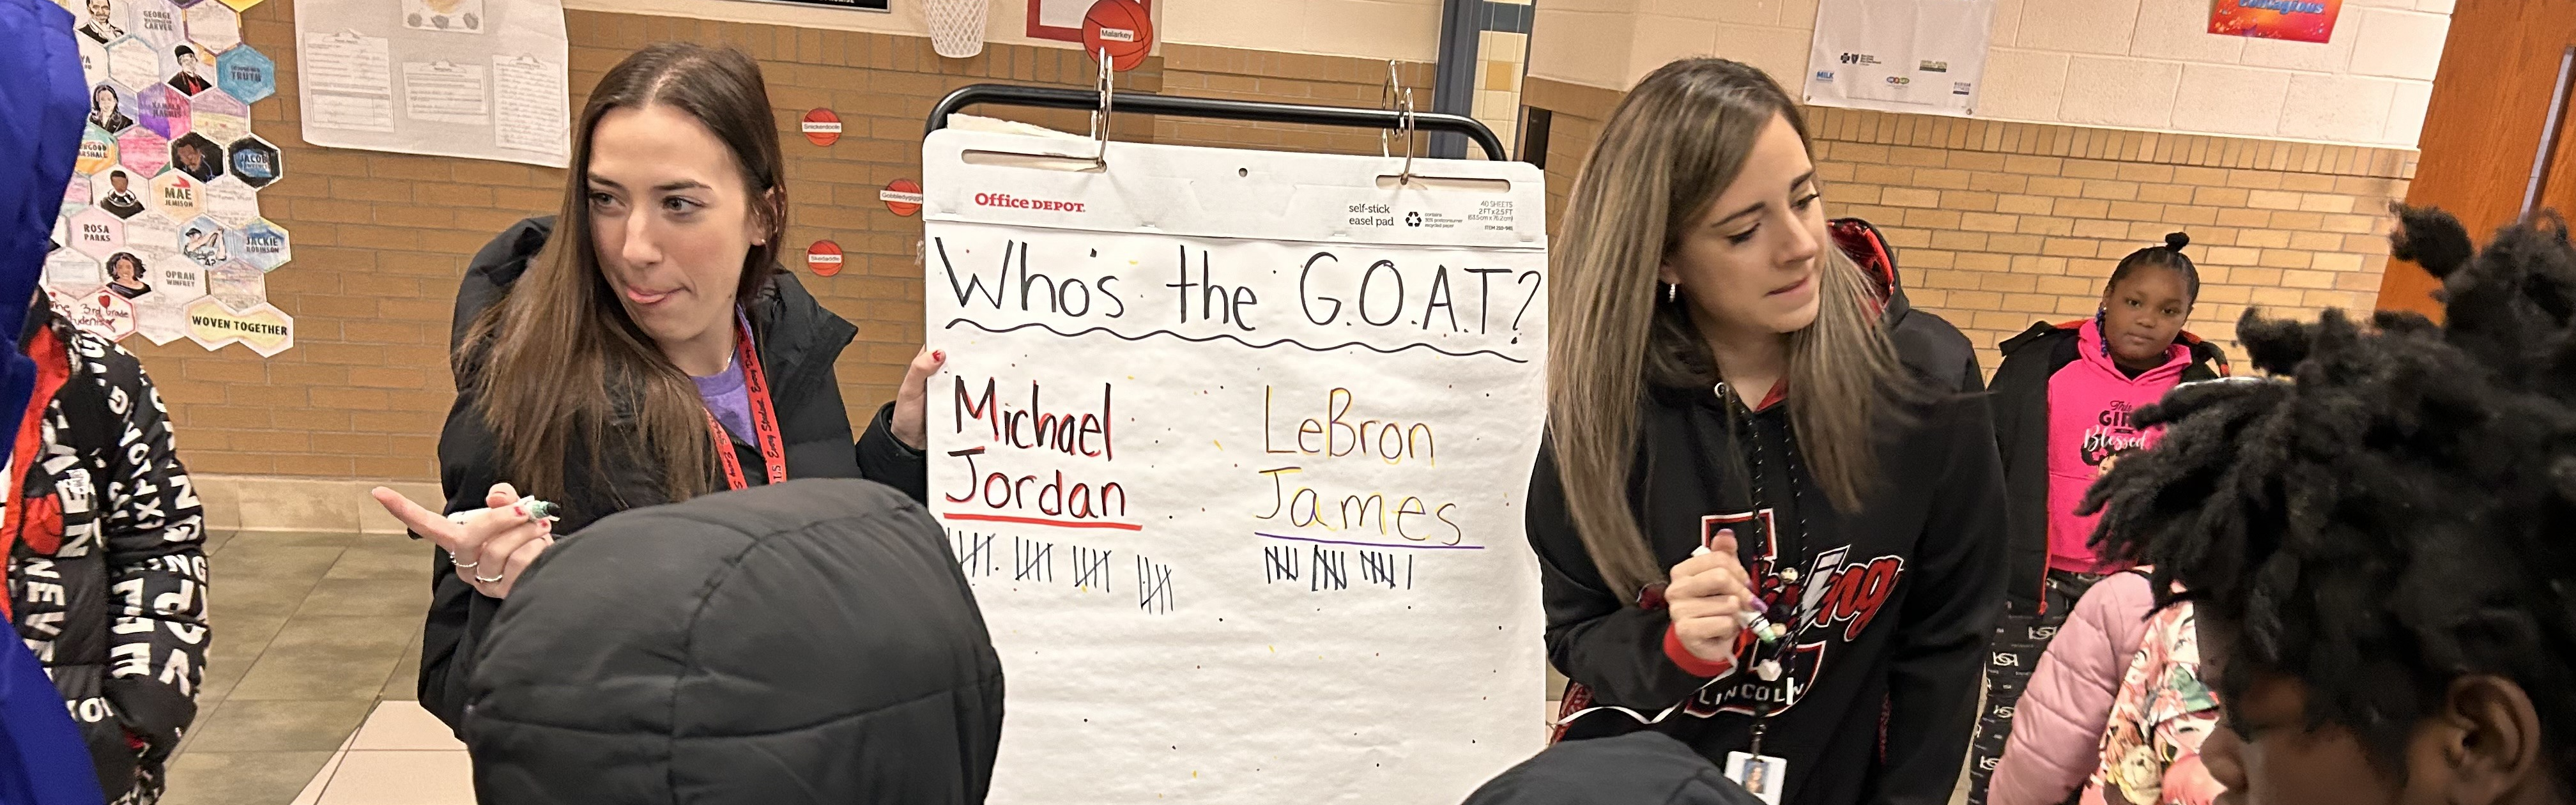 Who's the Goat